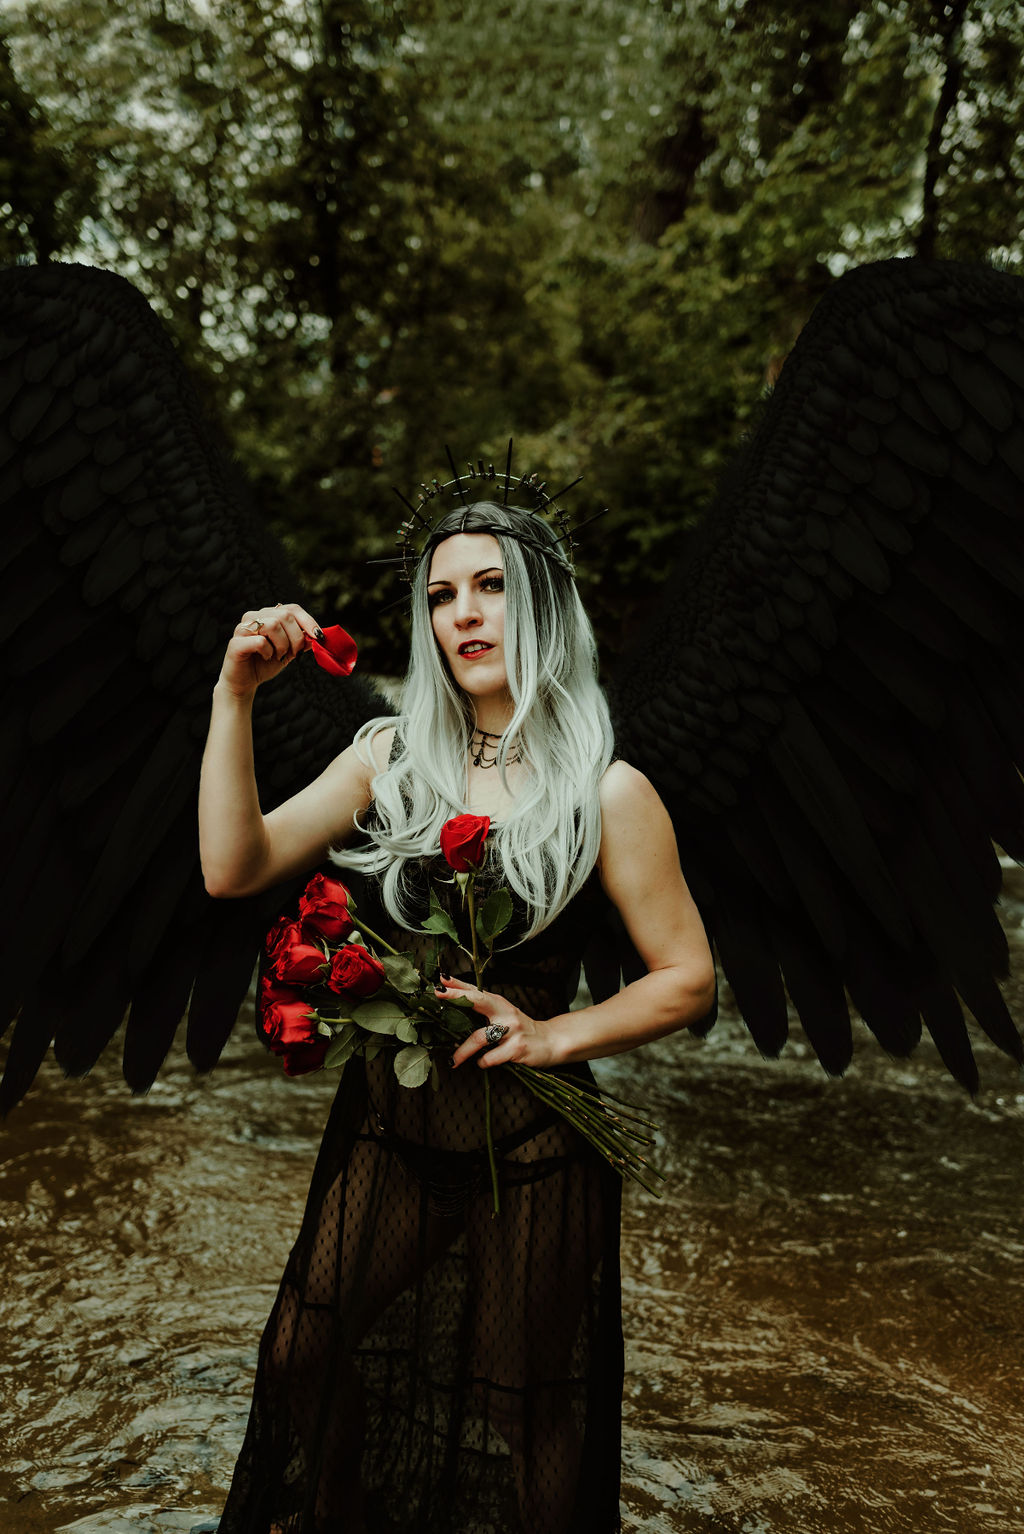 A person with large black wings stands in a shallow stream in a forest. The person is wearing a black dress with a sheer skirt and a flower crown made of red roses. The person is holding a red rose in their hand.